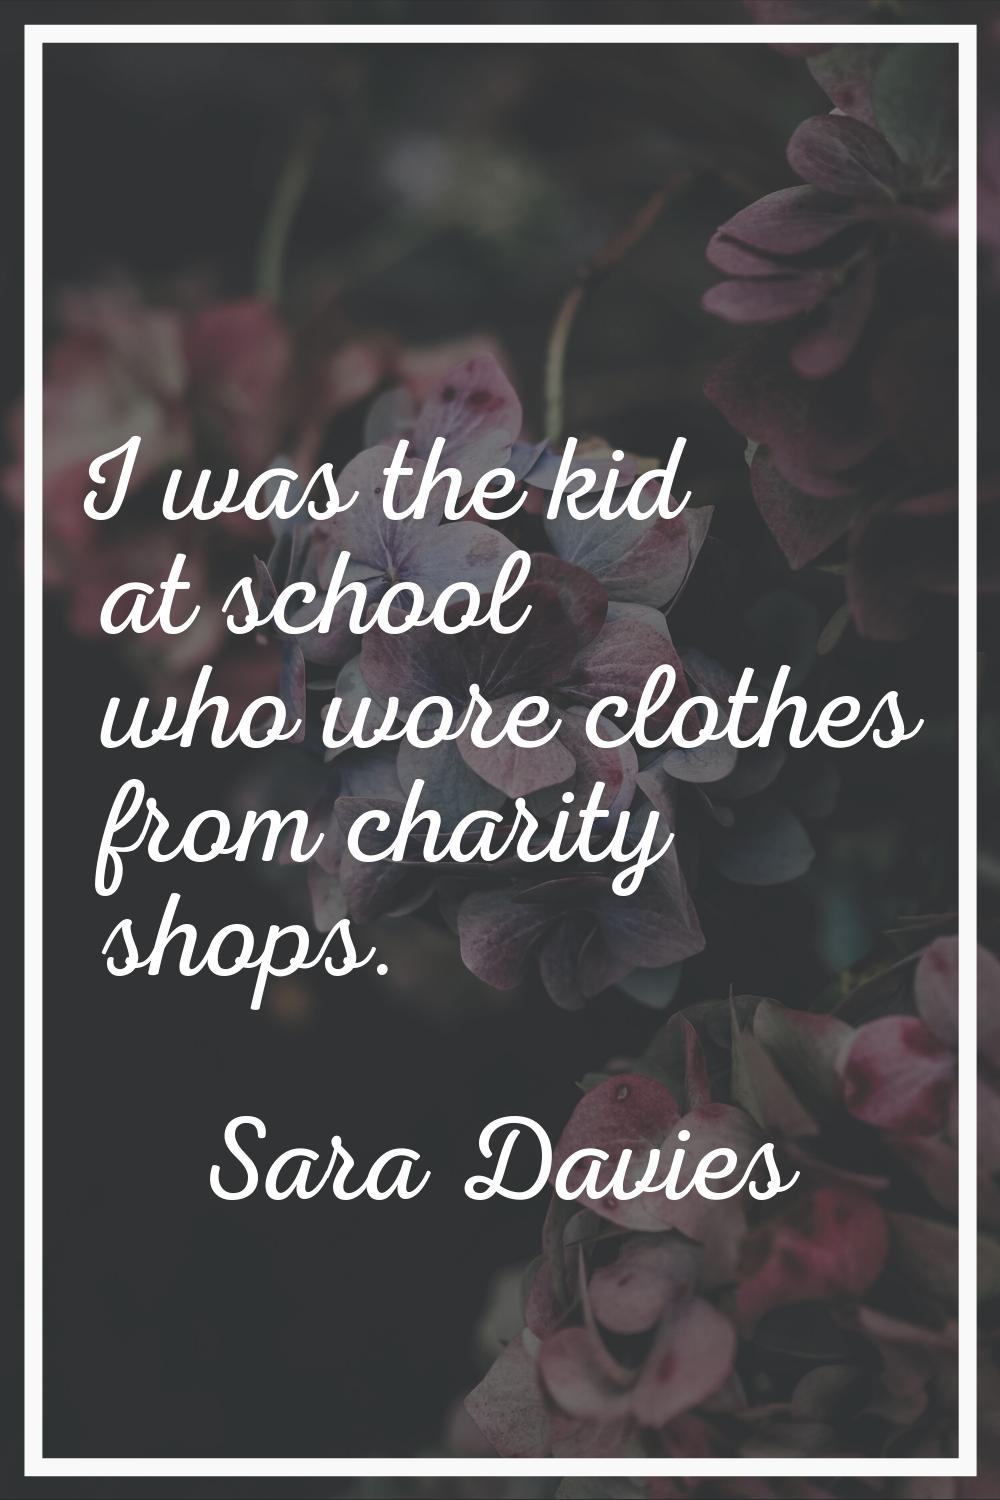 I was the kid at school who wore clothes from charity shops.